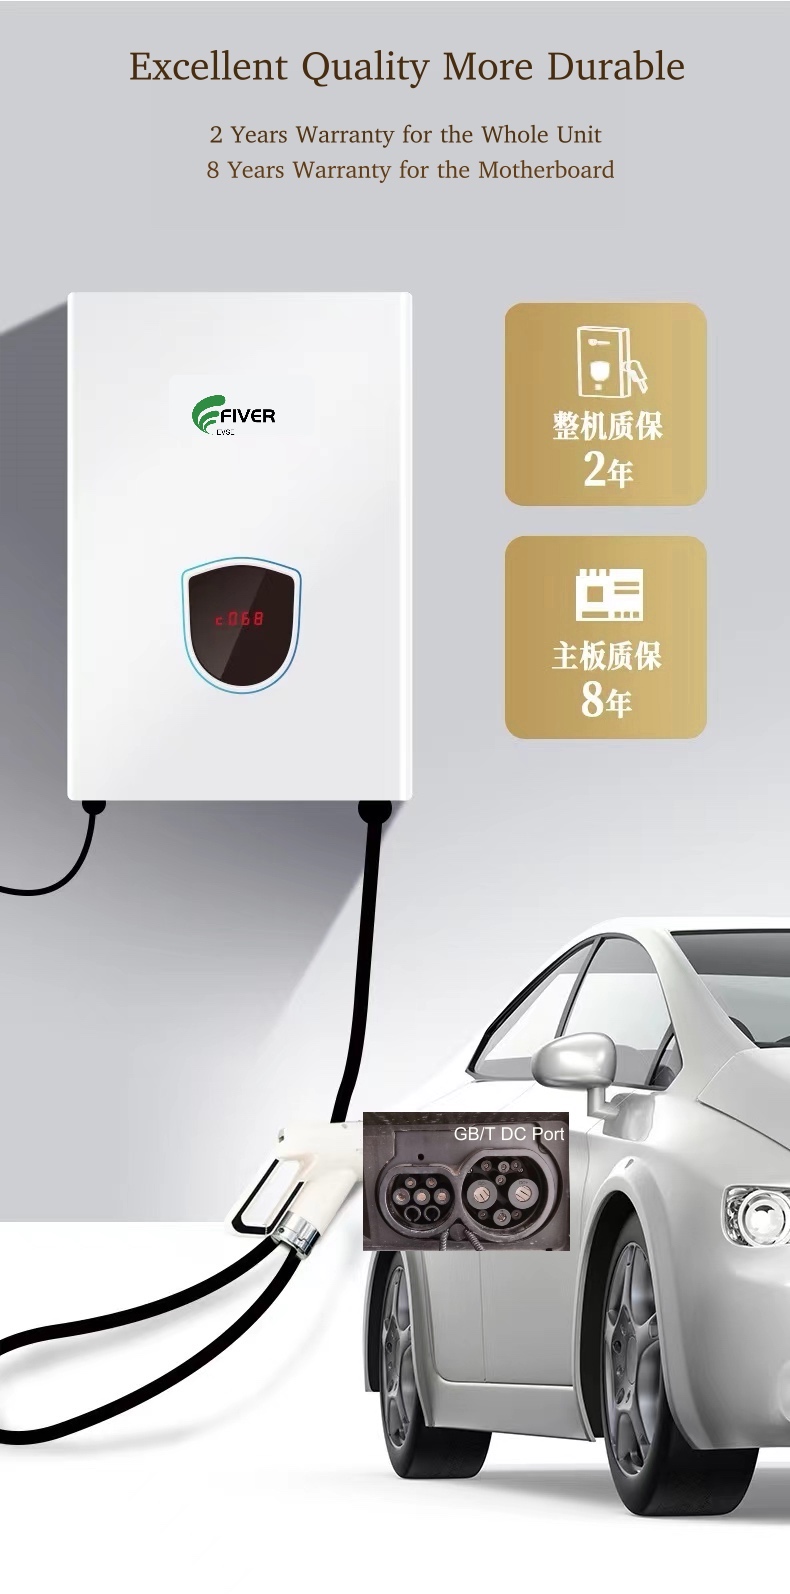 150-1000Vdc 40KW DC EV Charger with GBT Connector 